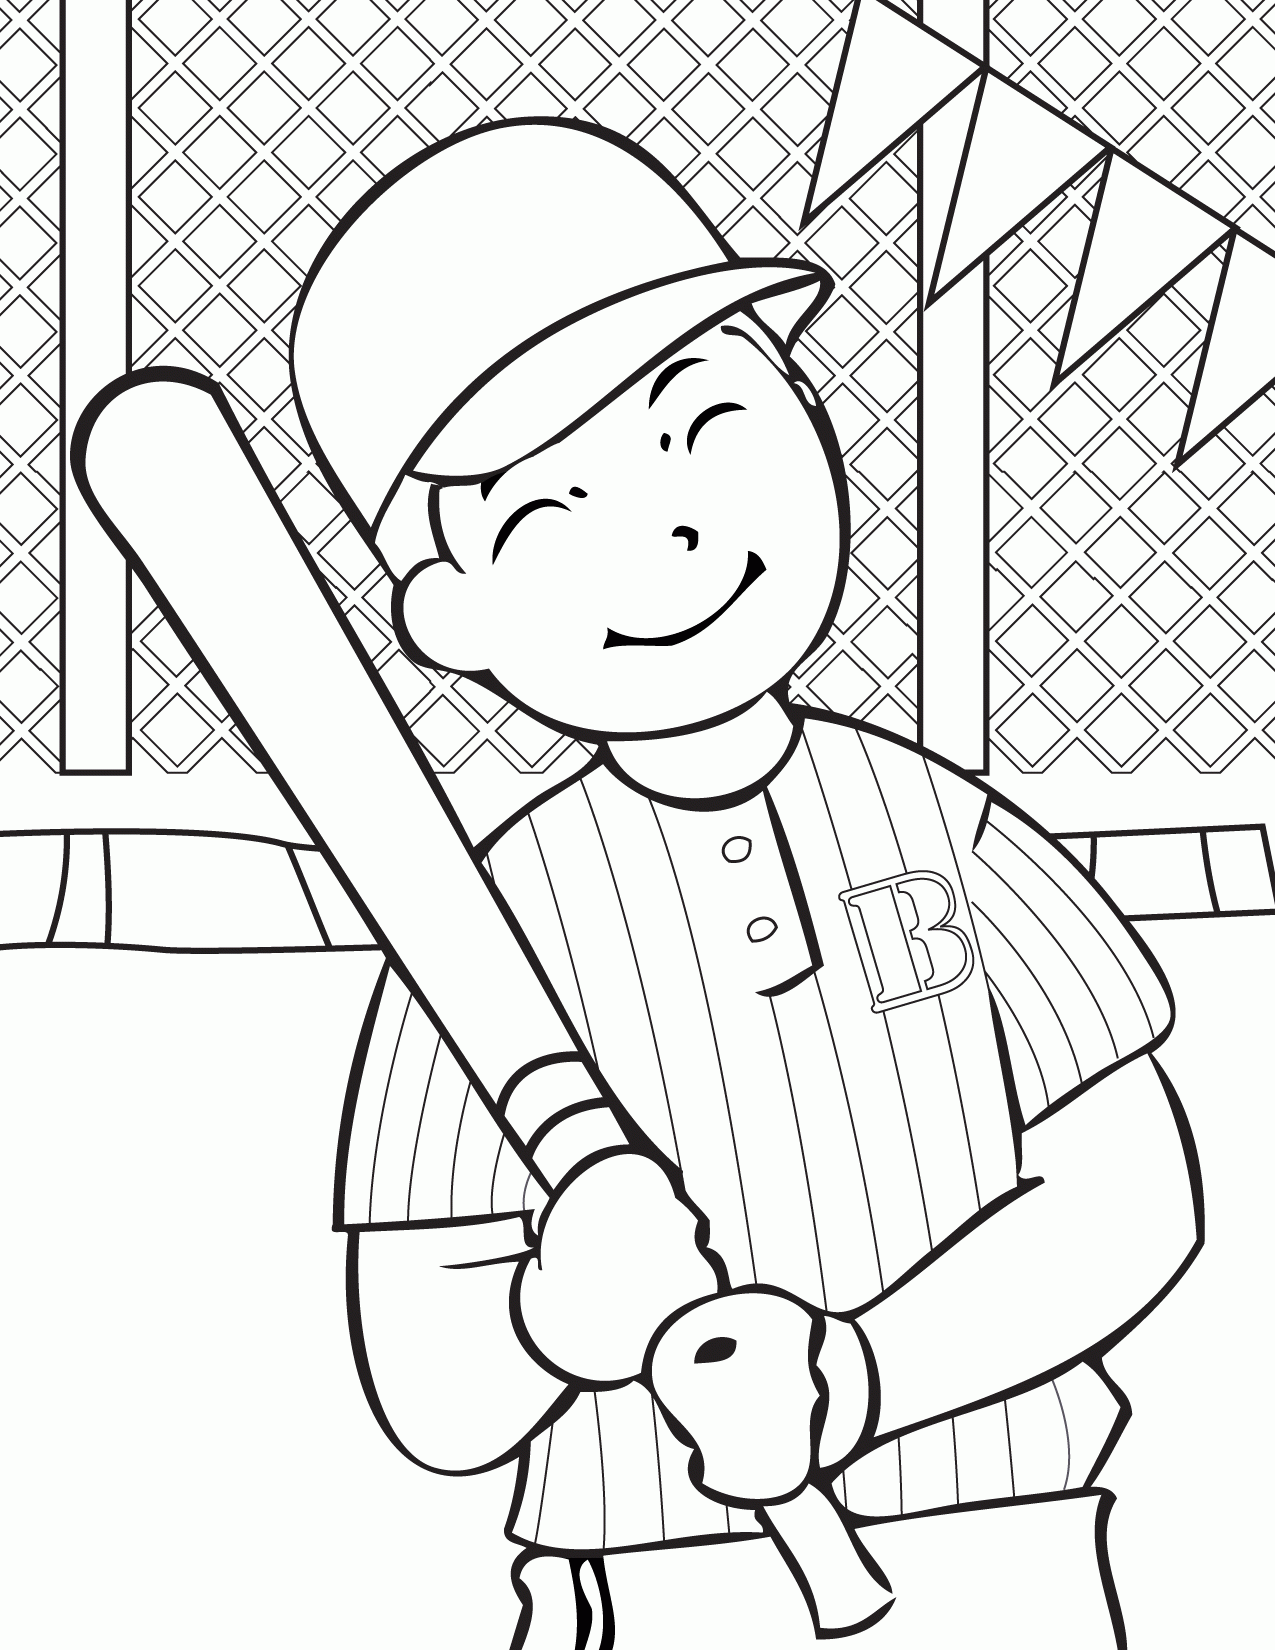 Baseball Pitcher Coloring Page Coloring Home